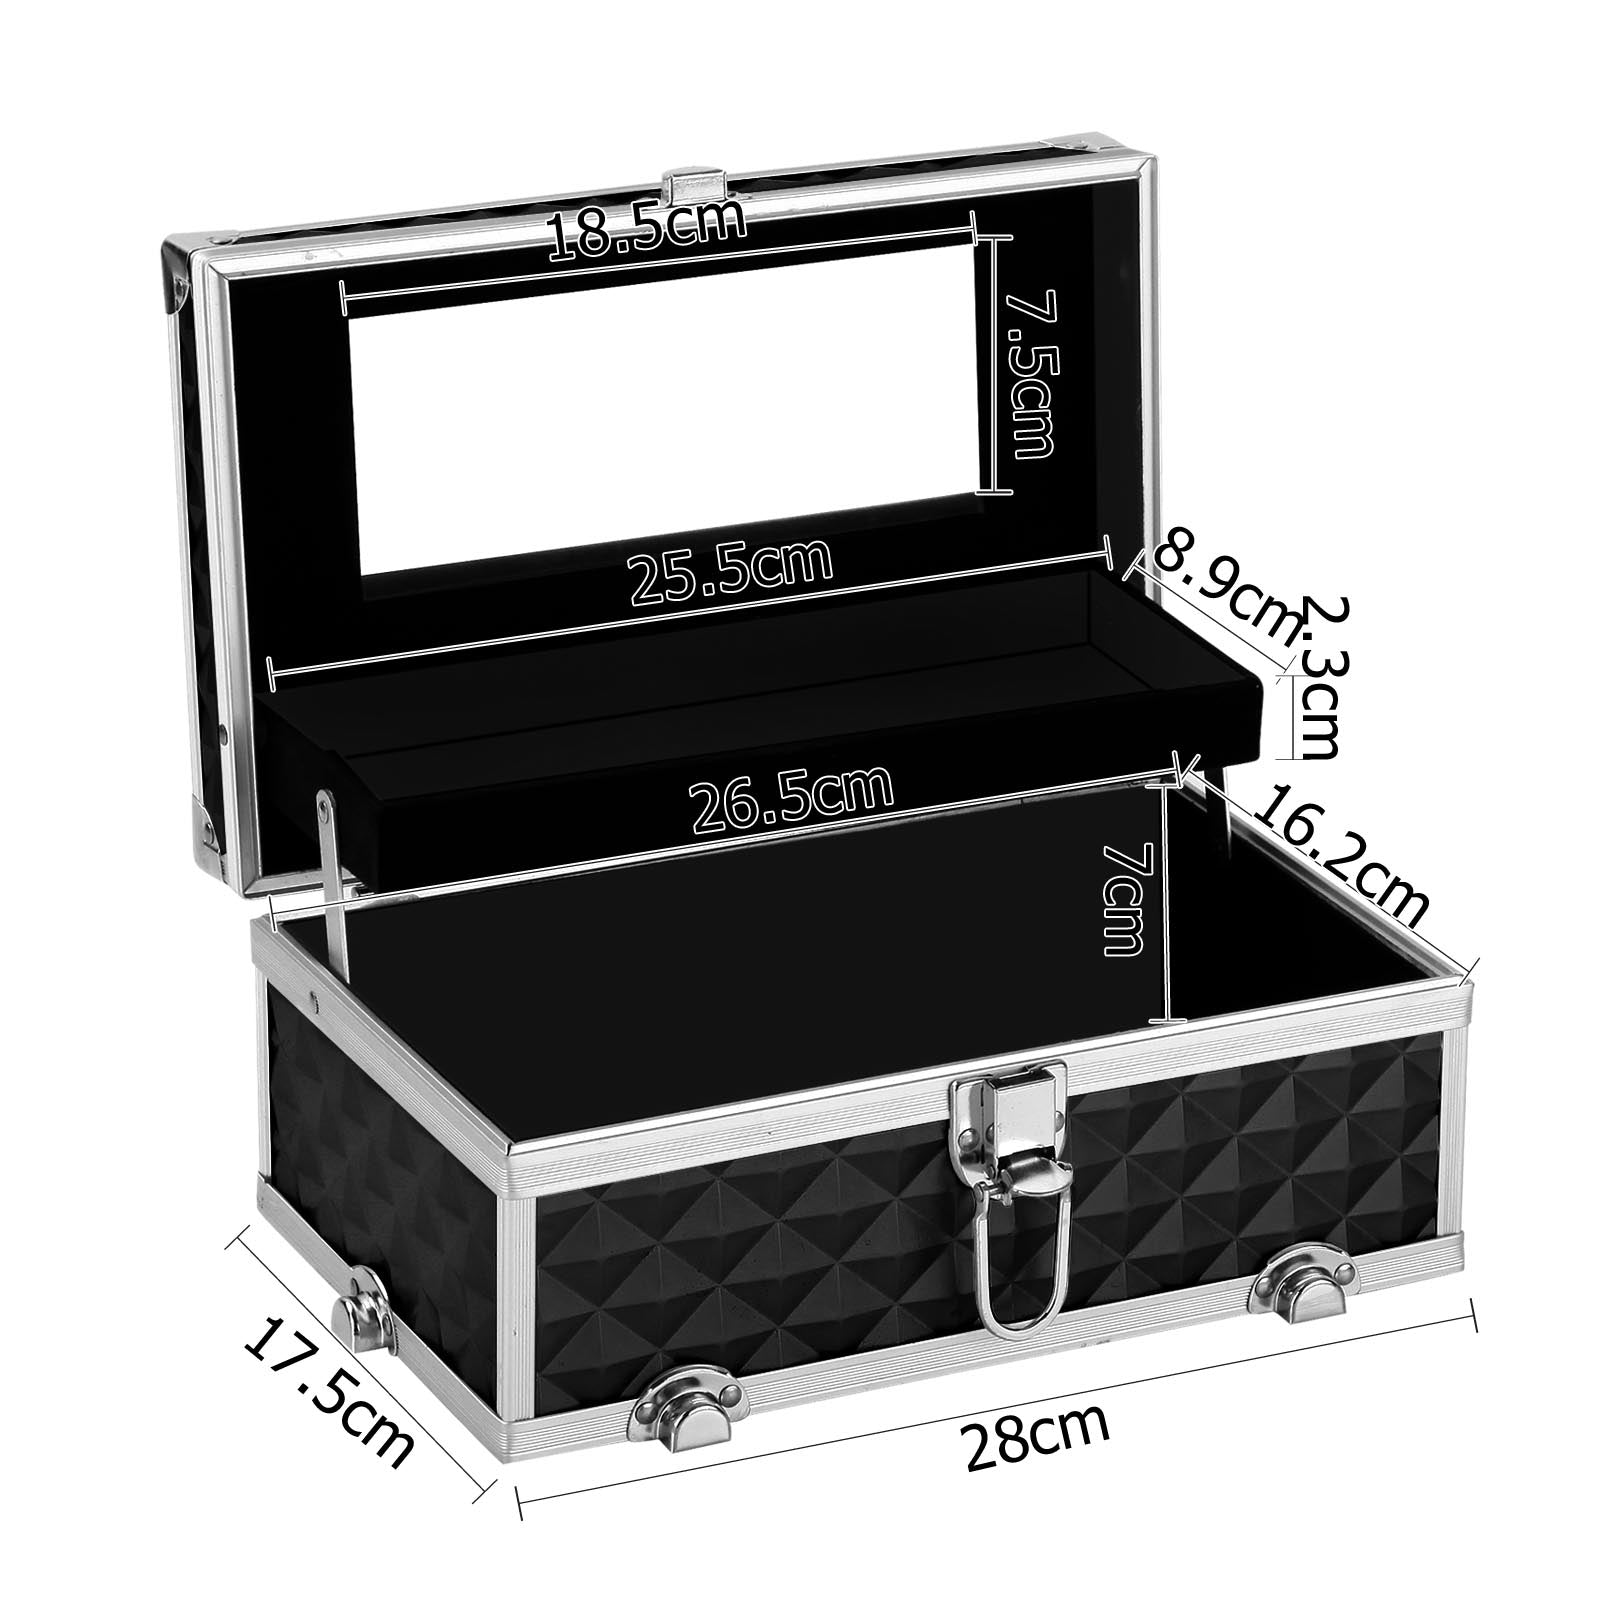 Portable Cosmetic Beauty Makeup Carry Case with Mirror - Diamond Black - image3